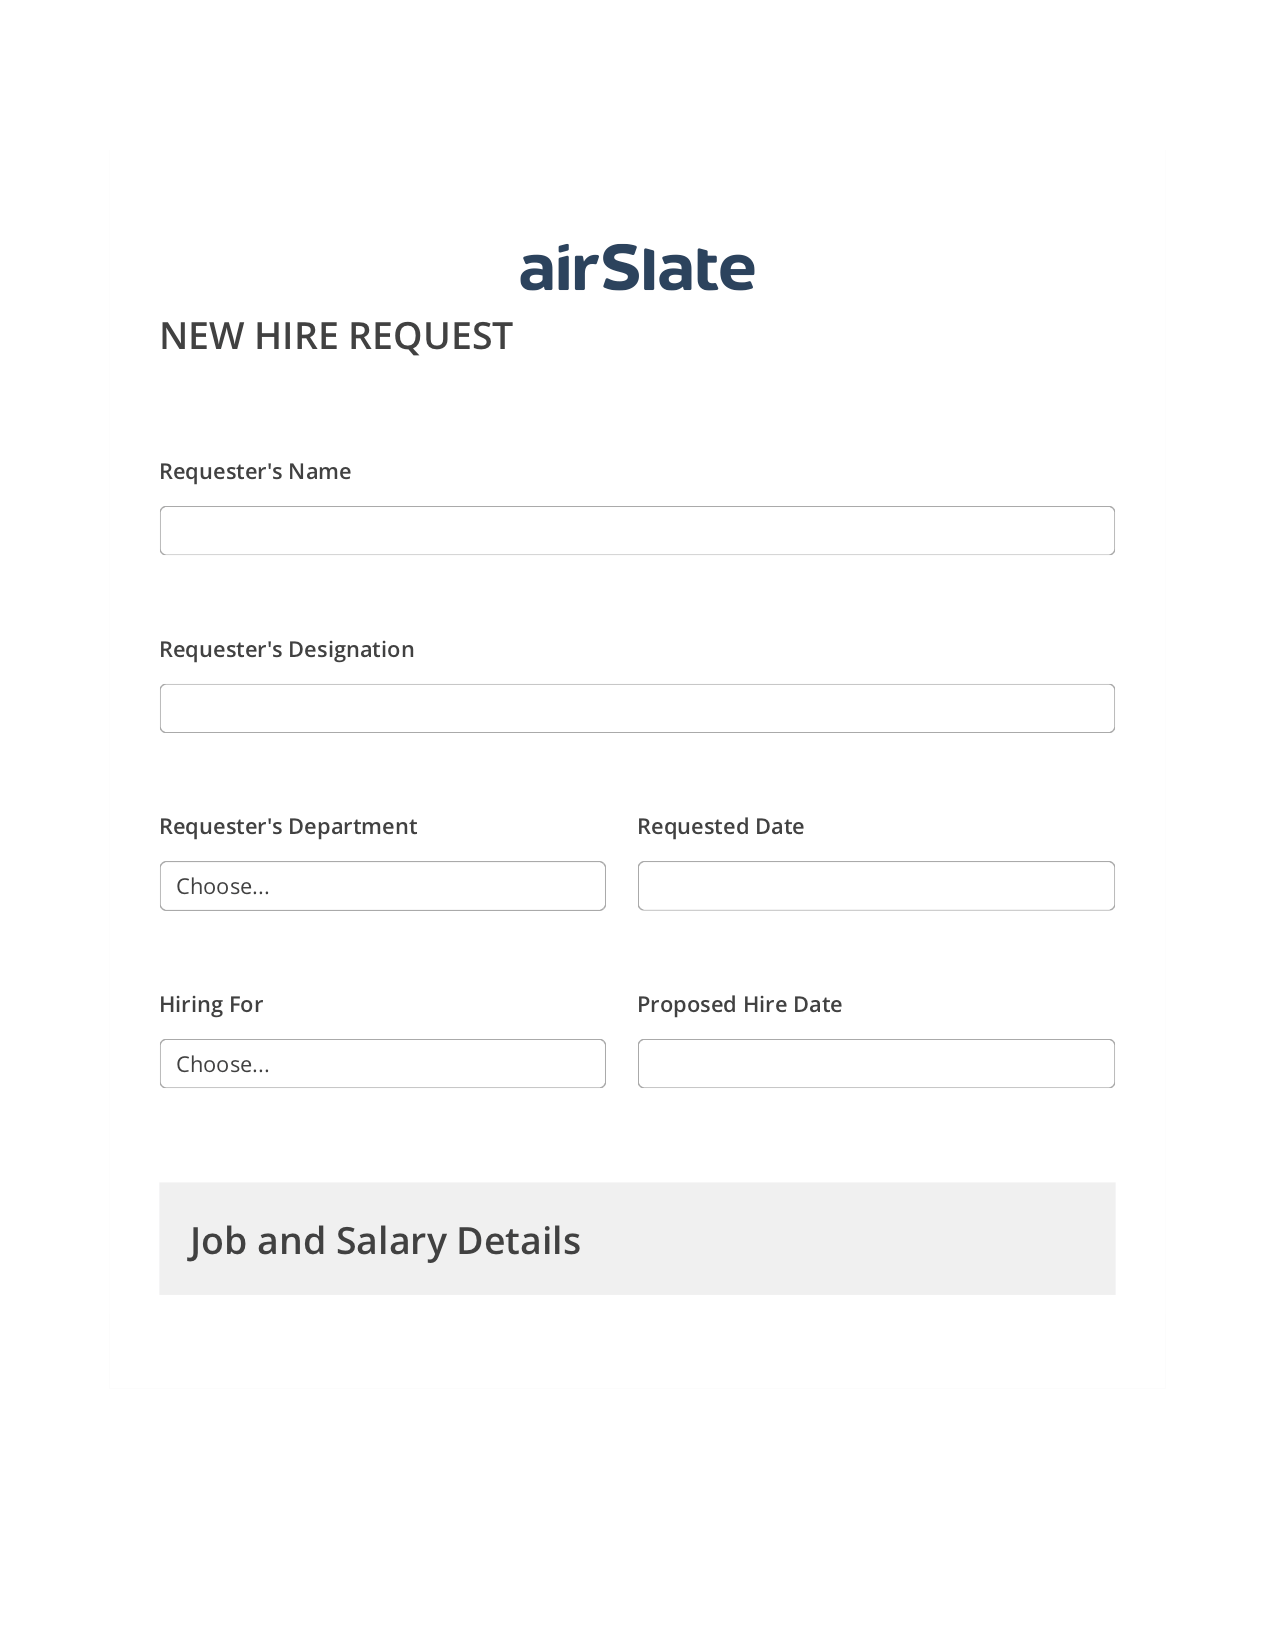 Hiring Request Workflow Pre-fill from Salesforce Records Bot, Create slate bot, Archive to SharePoint Folder Bot